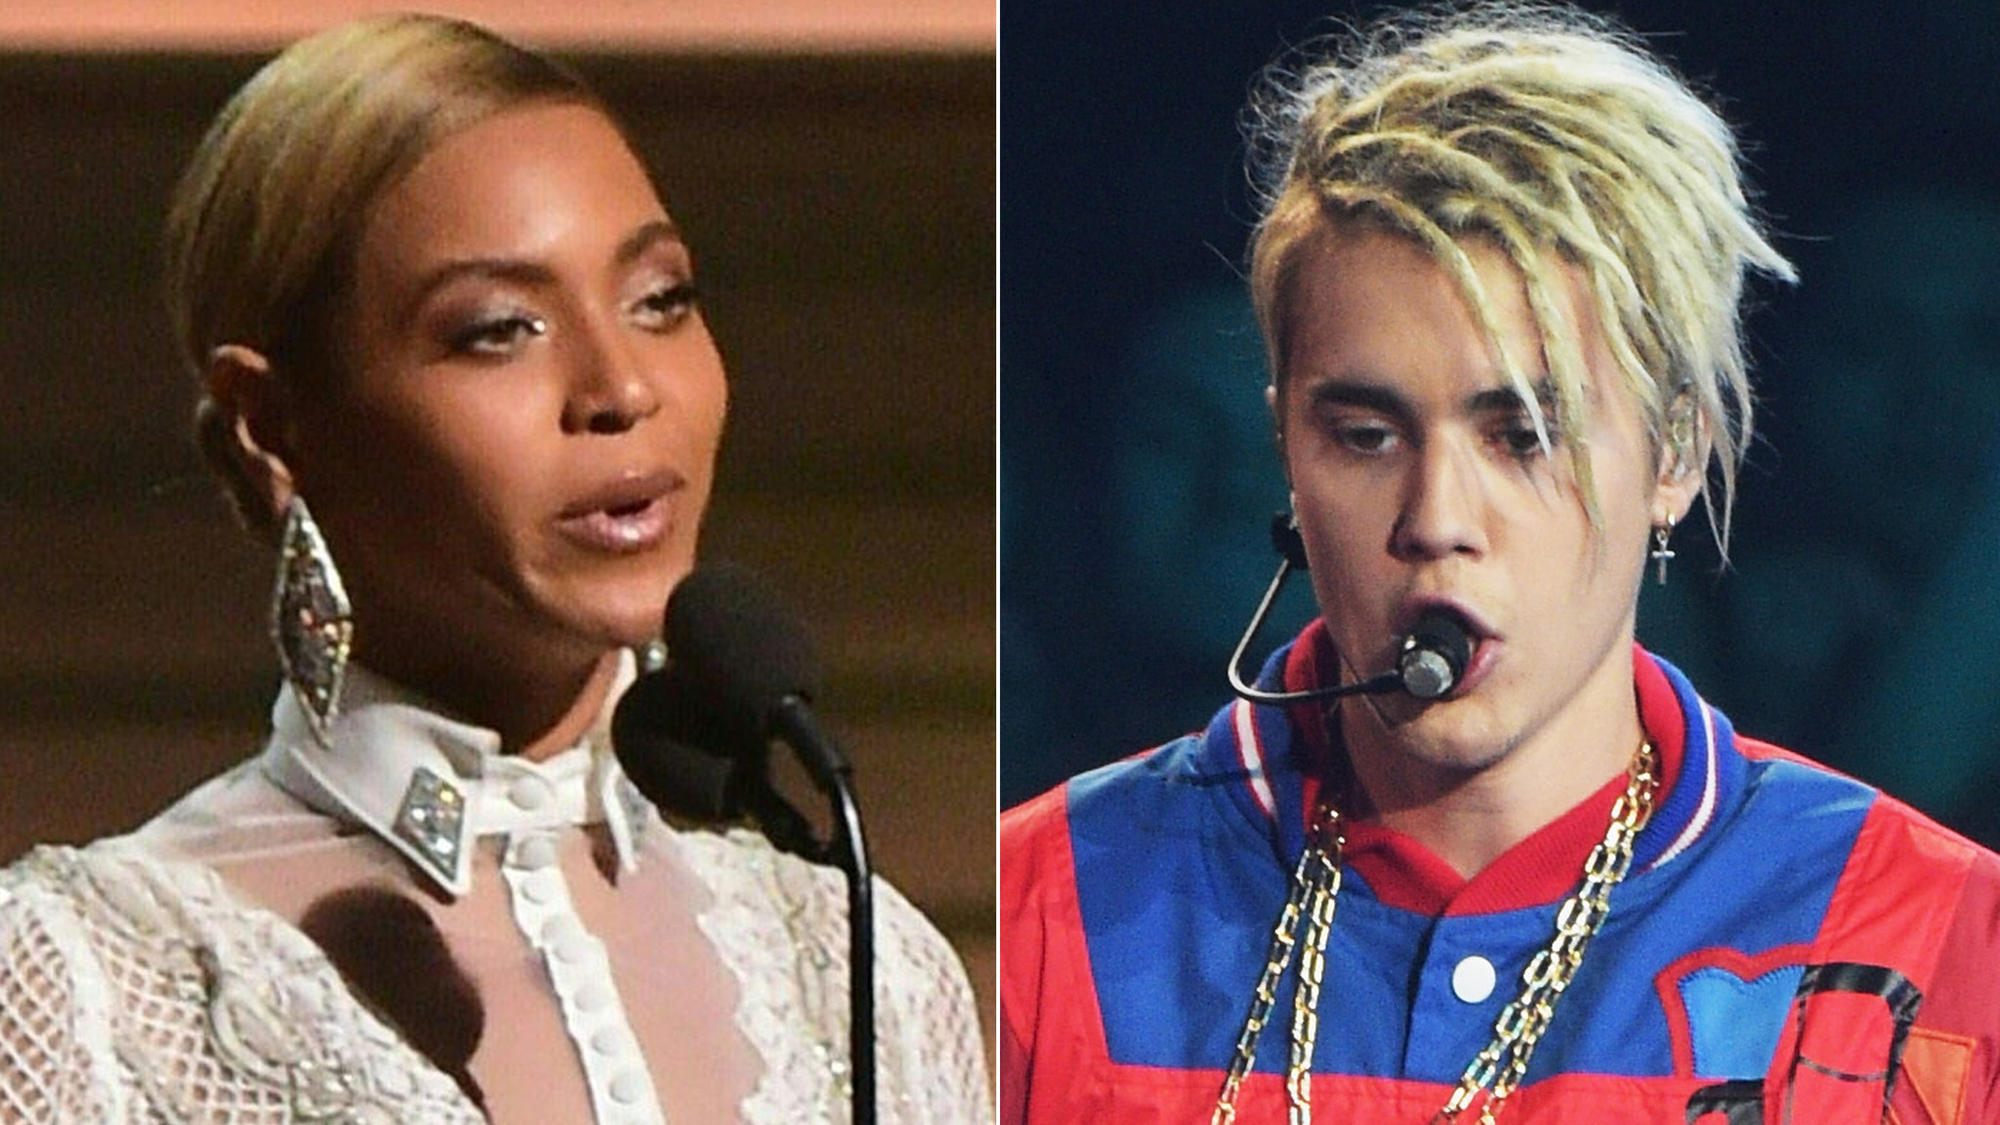 Beyonce and Justin Bieber are among those who have North Carolina concerts on tap.